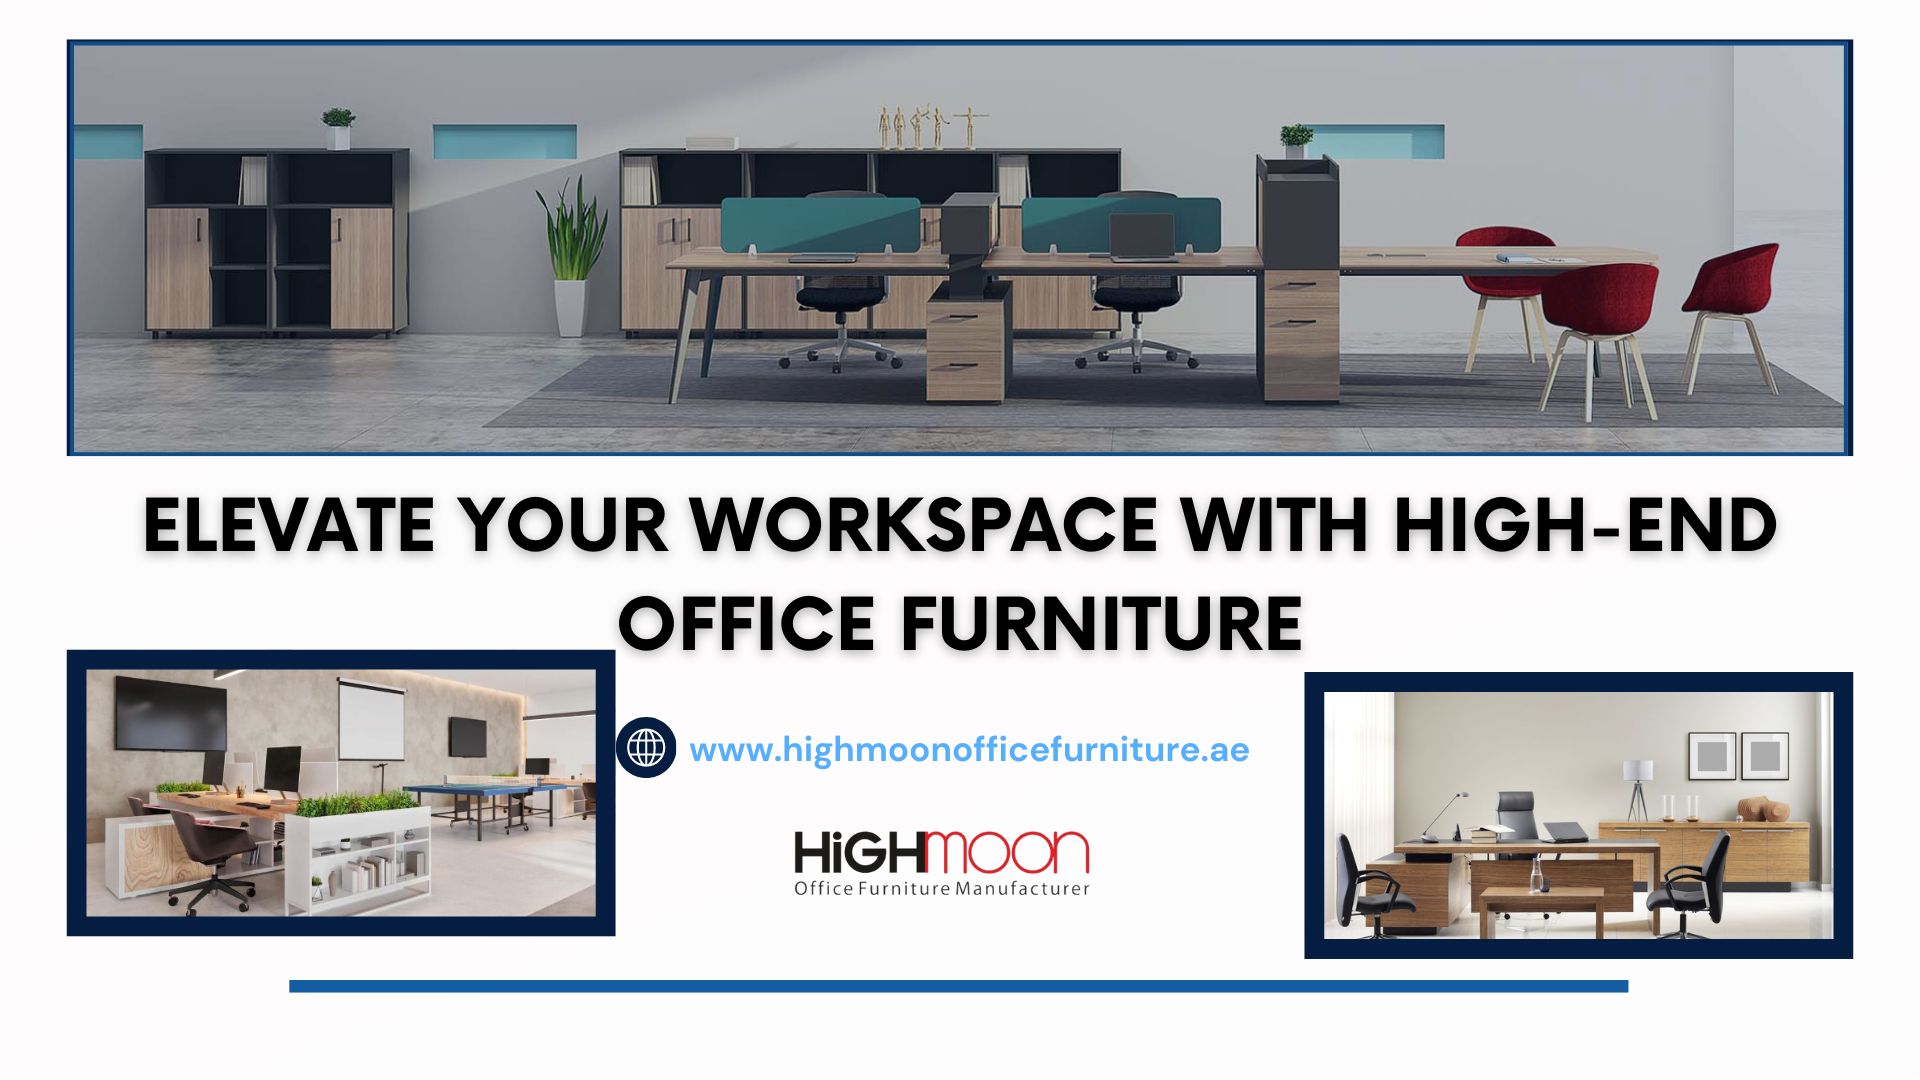 High-End Office Furniture Stores and Shops